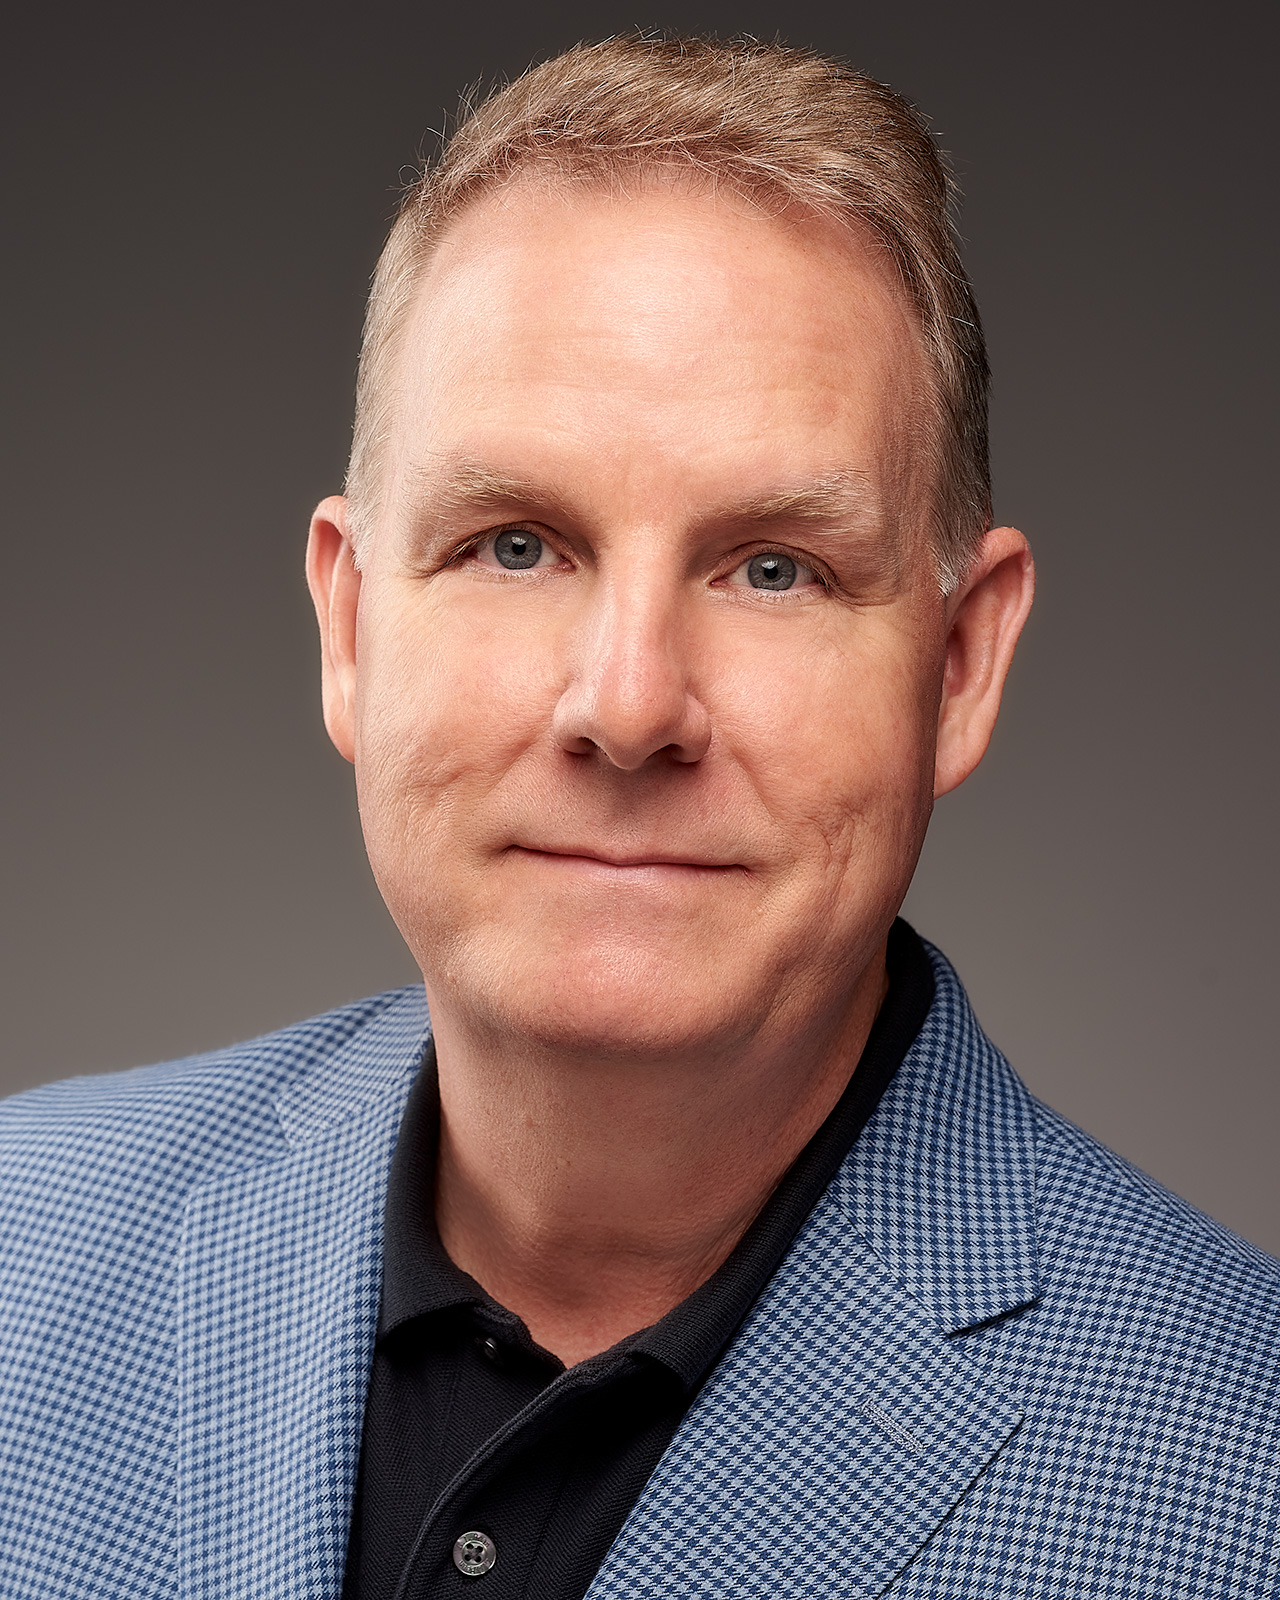 A realtor in a headshot in Los Angeles made by The Light Committee